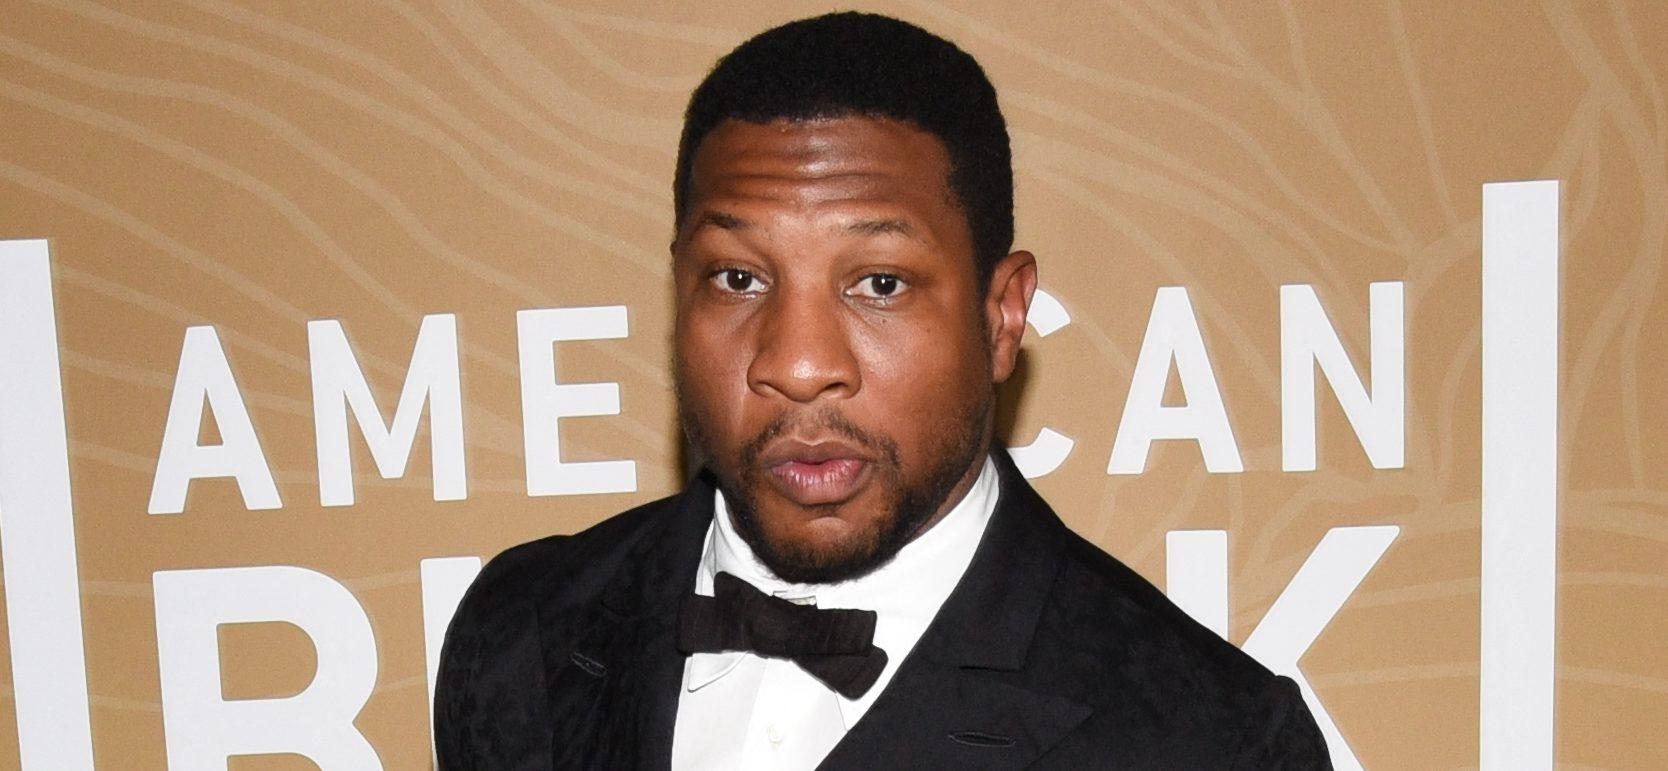 Jonathan Majors Refutes Assault Allegations, Lawyer Claims There Is Substantial Evidence To Prove Innocence